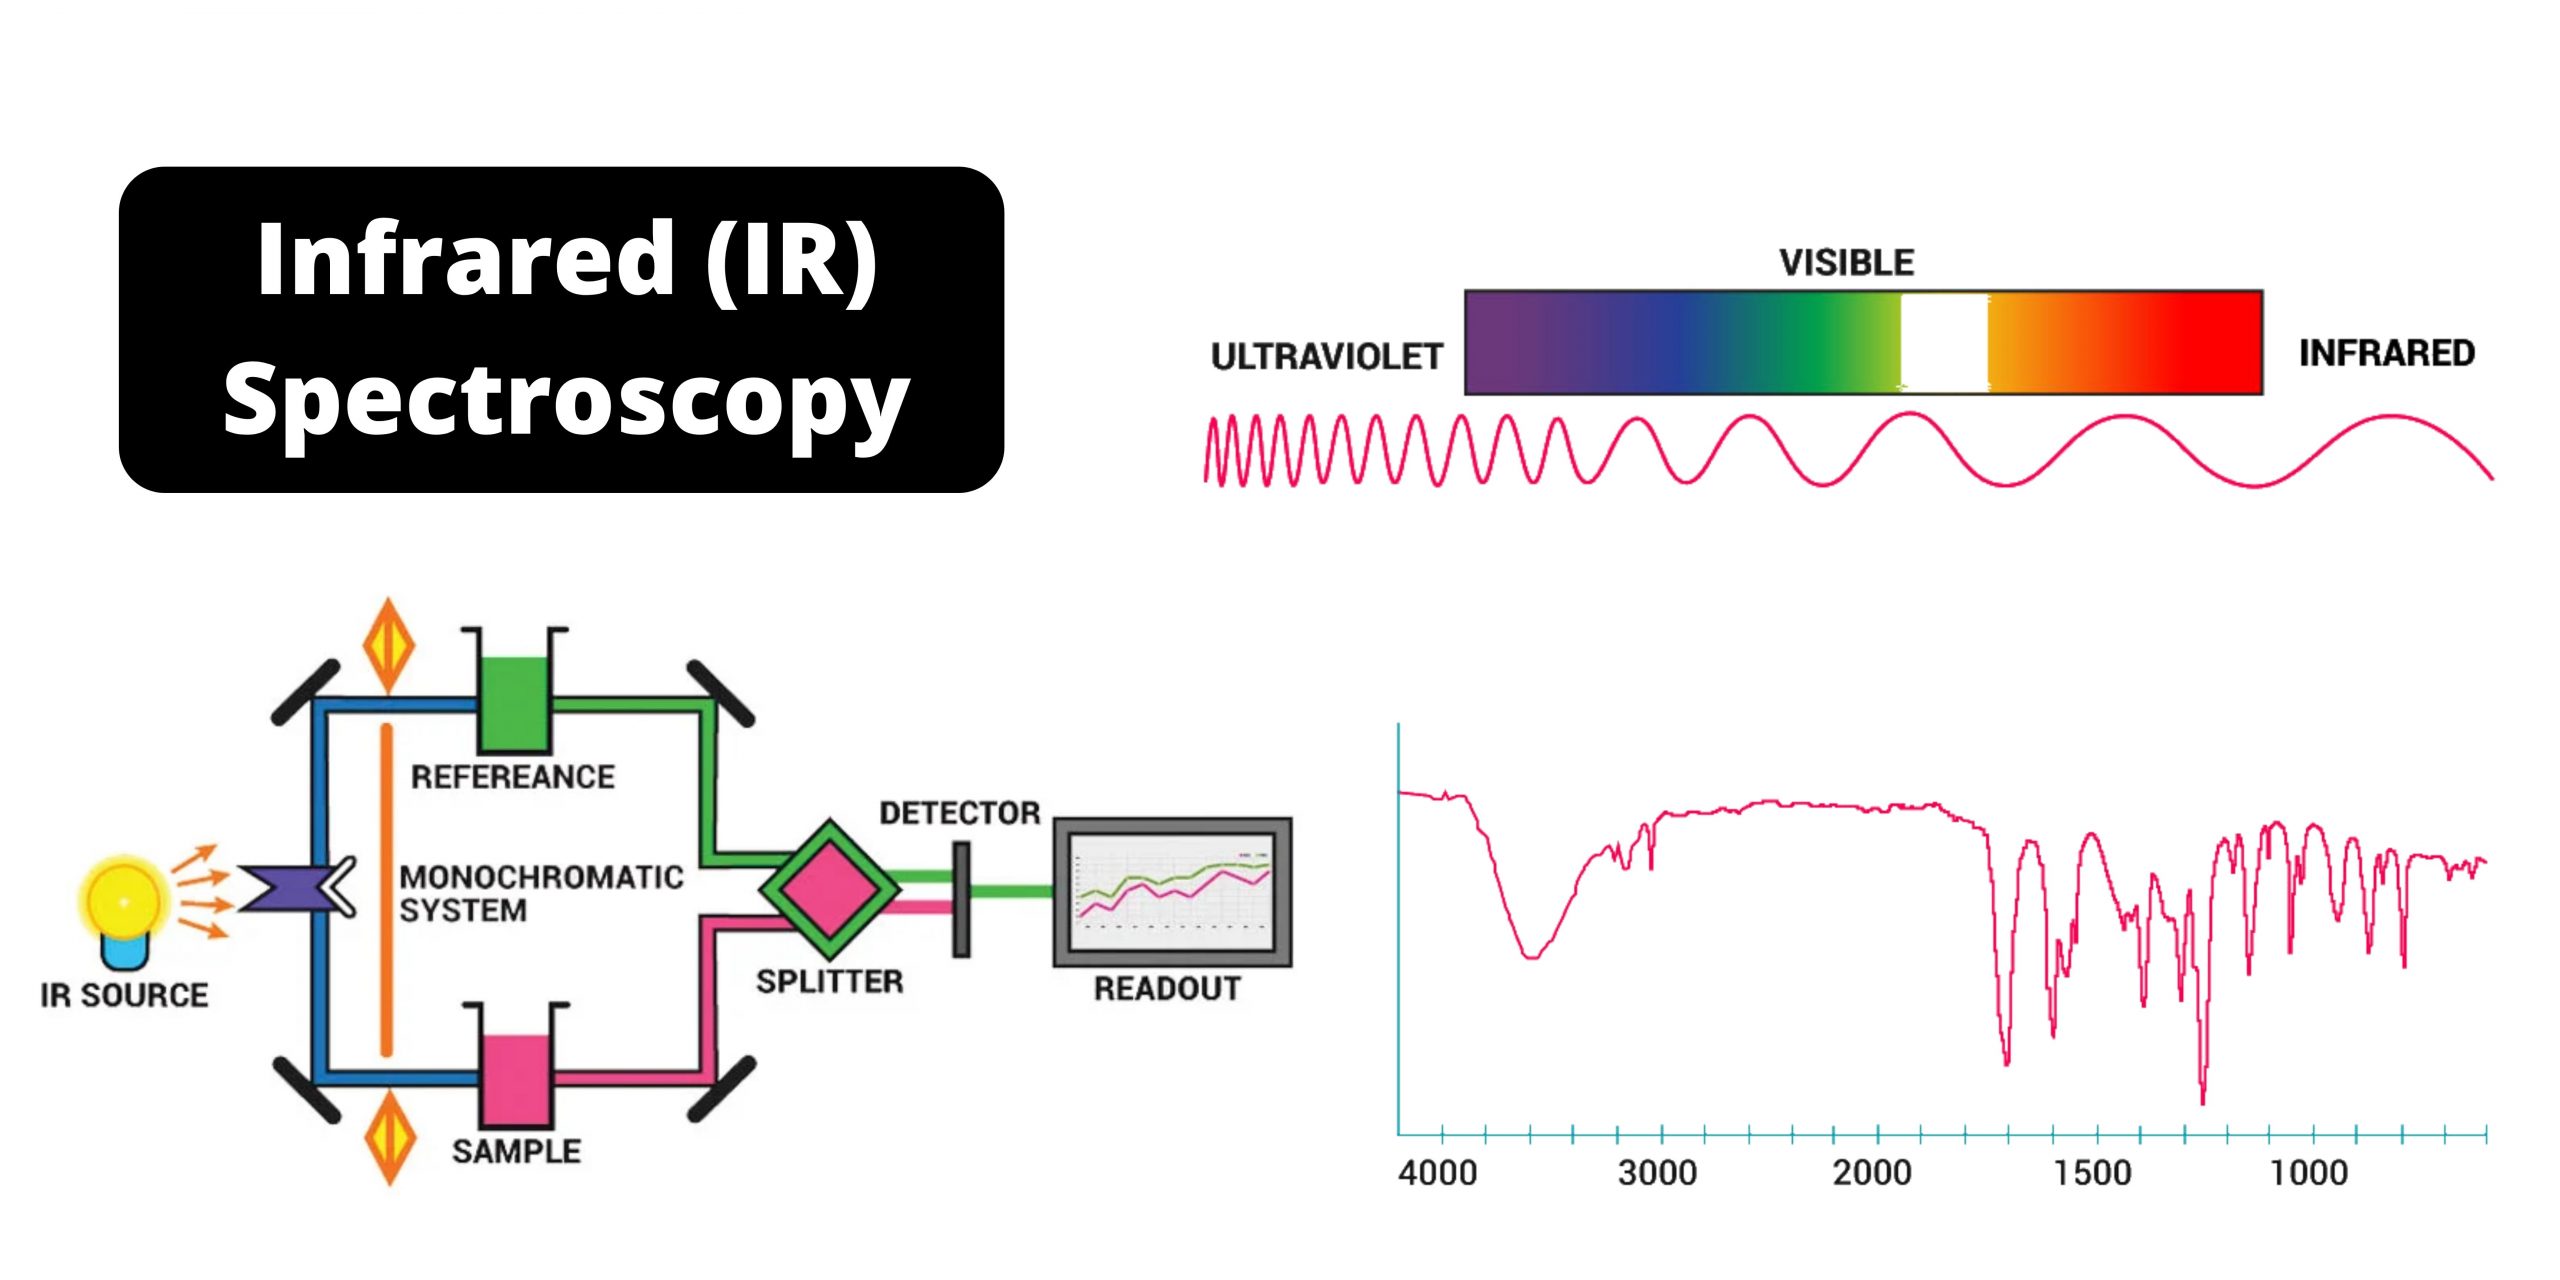 post lab assignment for technique 25 infrared spectroscopy